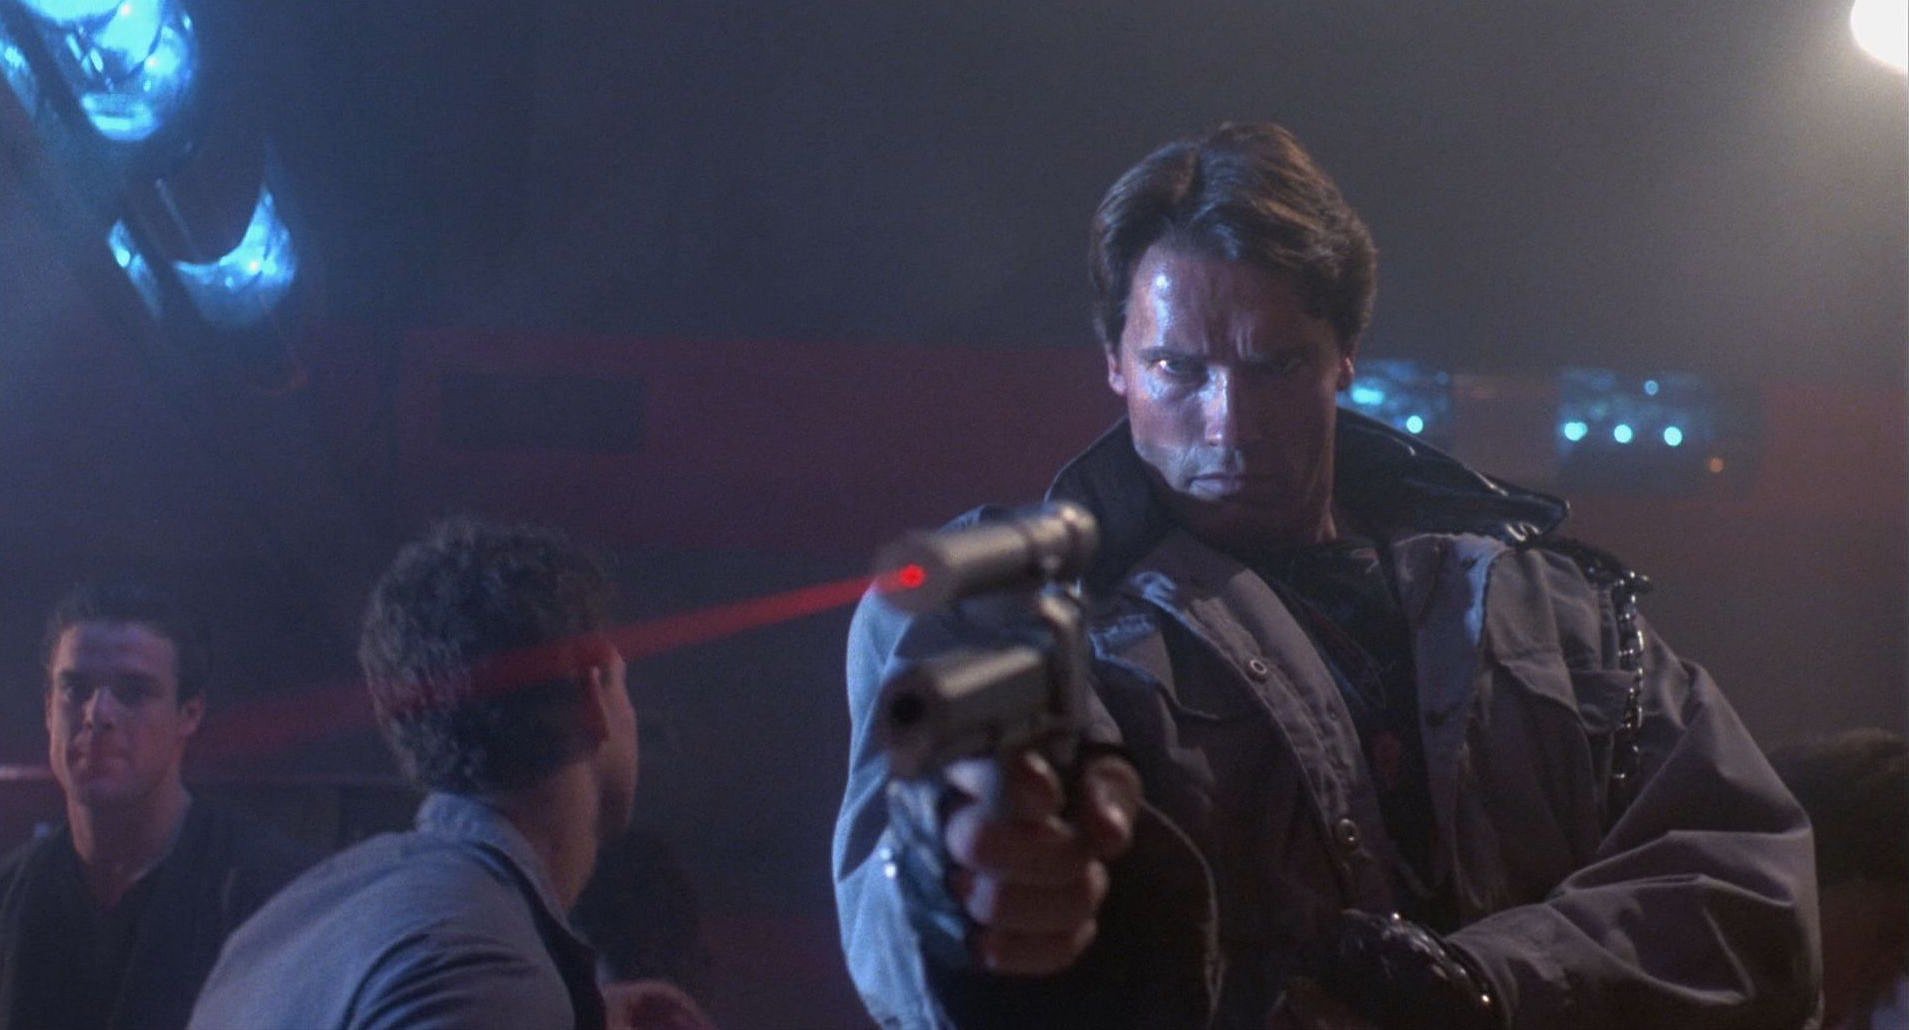 The modestly budgeted sci-fi action film The Terminator (covered in AC April ’85) became a massive hit, launching the careers not only of star Arnold Schwarzenegger and writer-director James Cameron, but also cinematographer Adam Greenberg, ASC. The trio would re-team for the sequel, Terminator 2: Judgment Day (covered in AC July ’91).